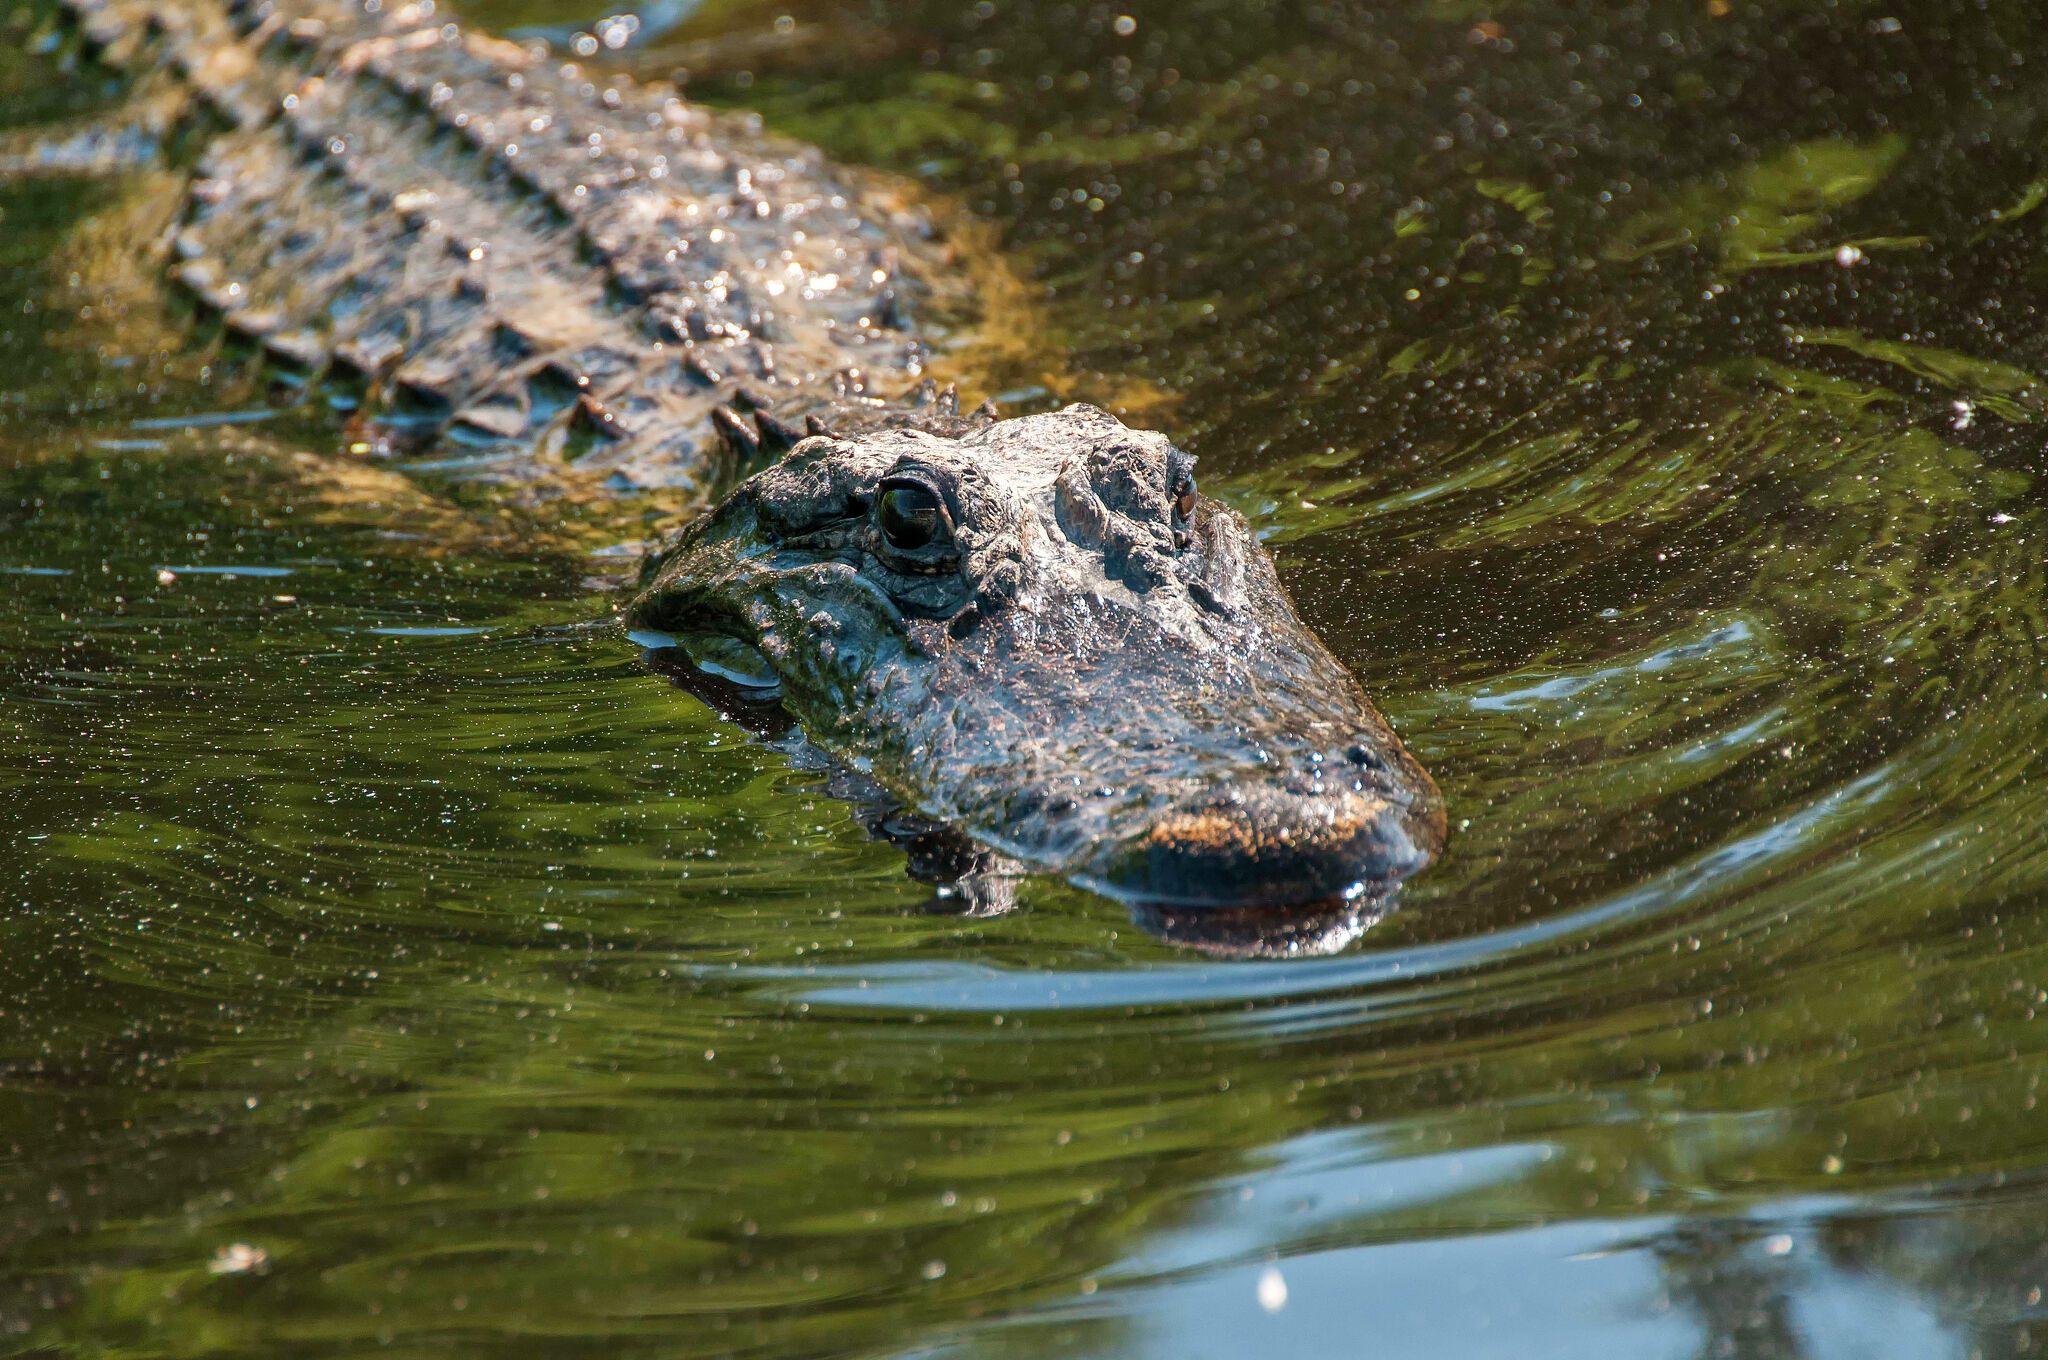 WATCH: 2 alligators trap swimmers at Texas state park